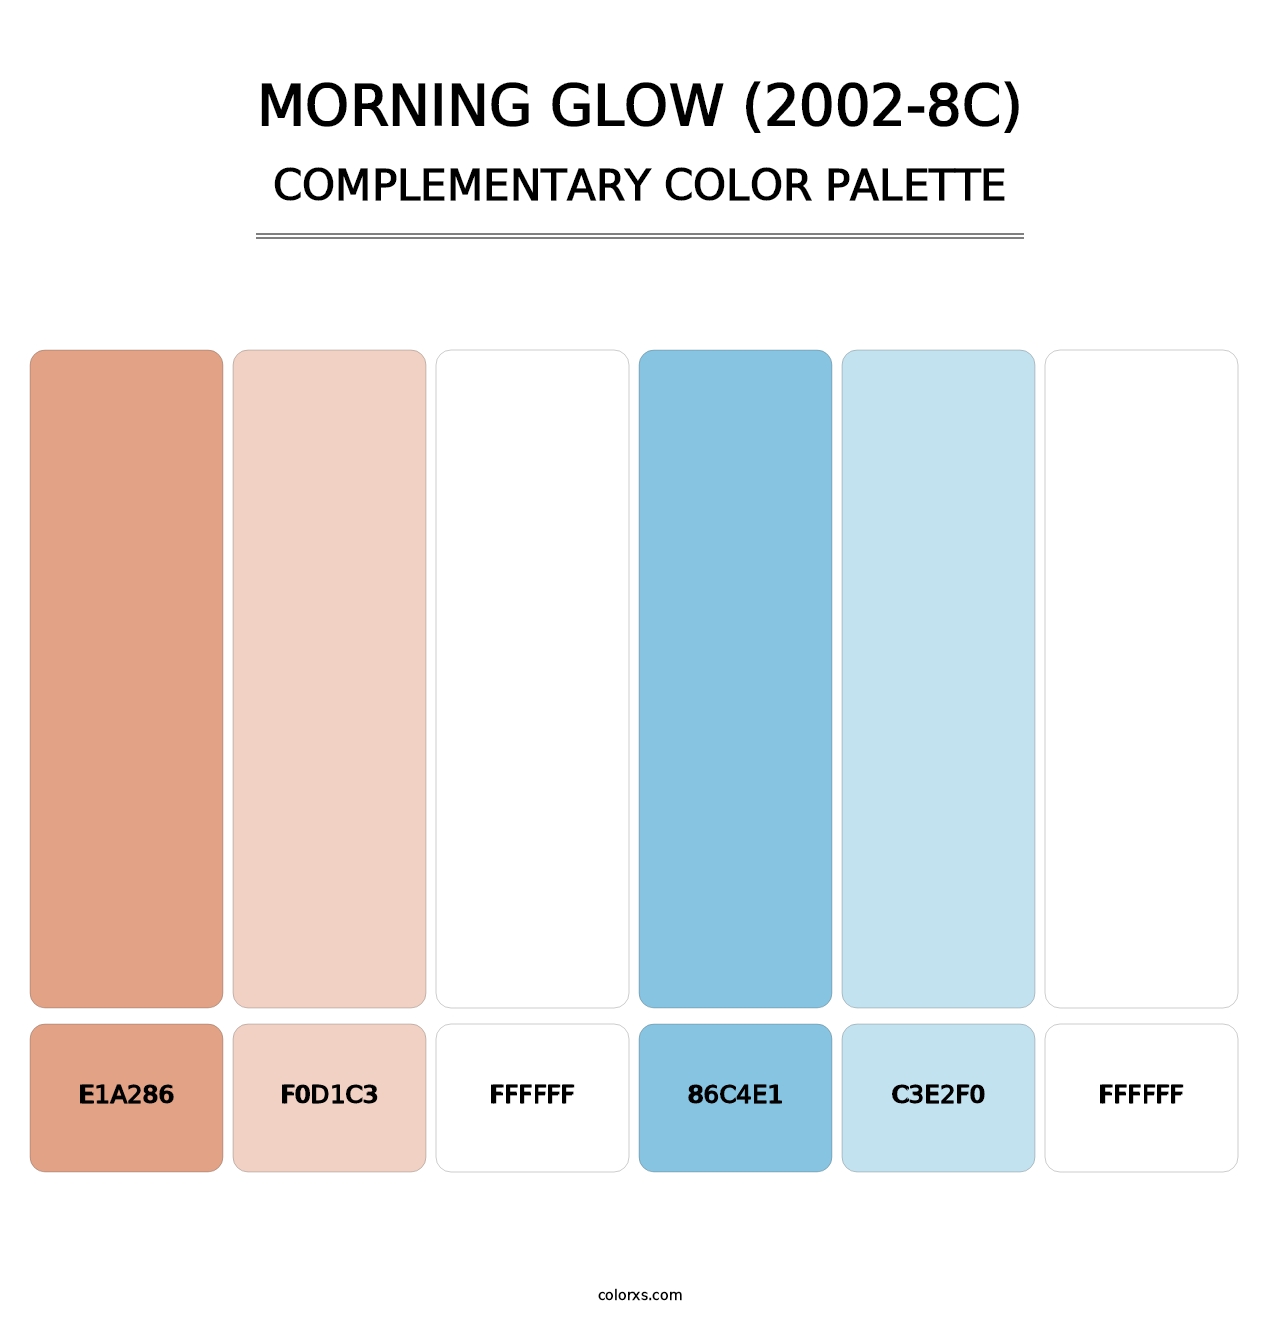 Morning Glow (2002-8C) - Complementary Color Palette